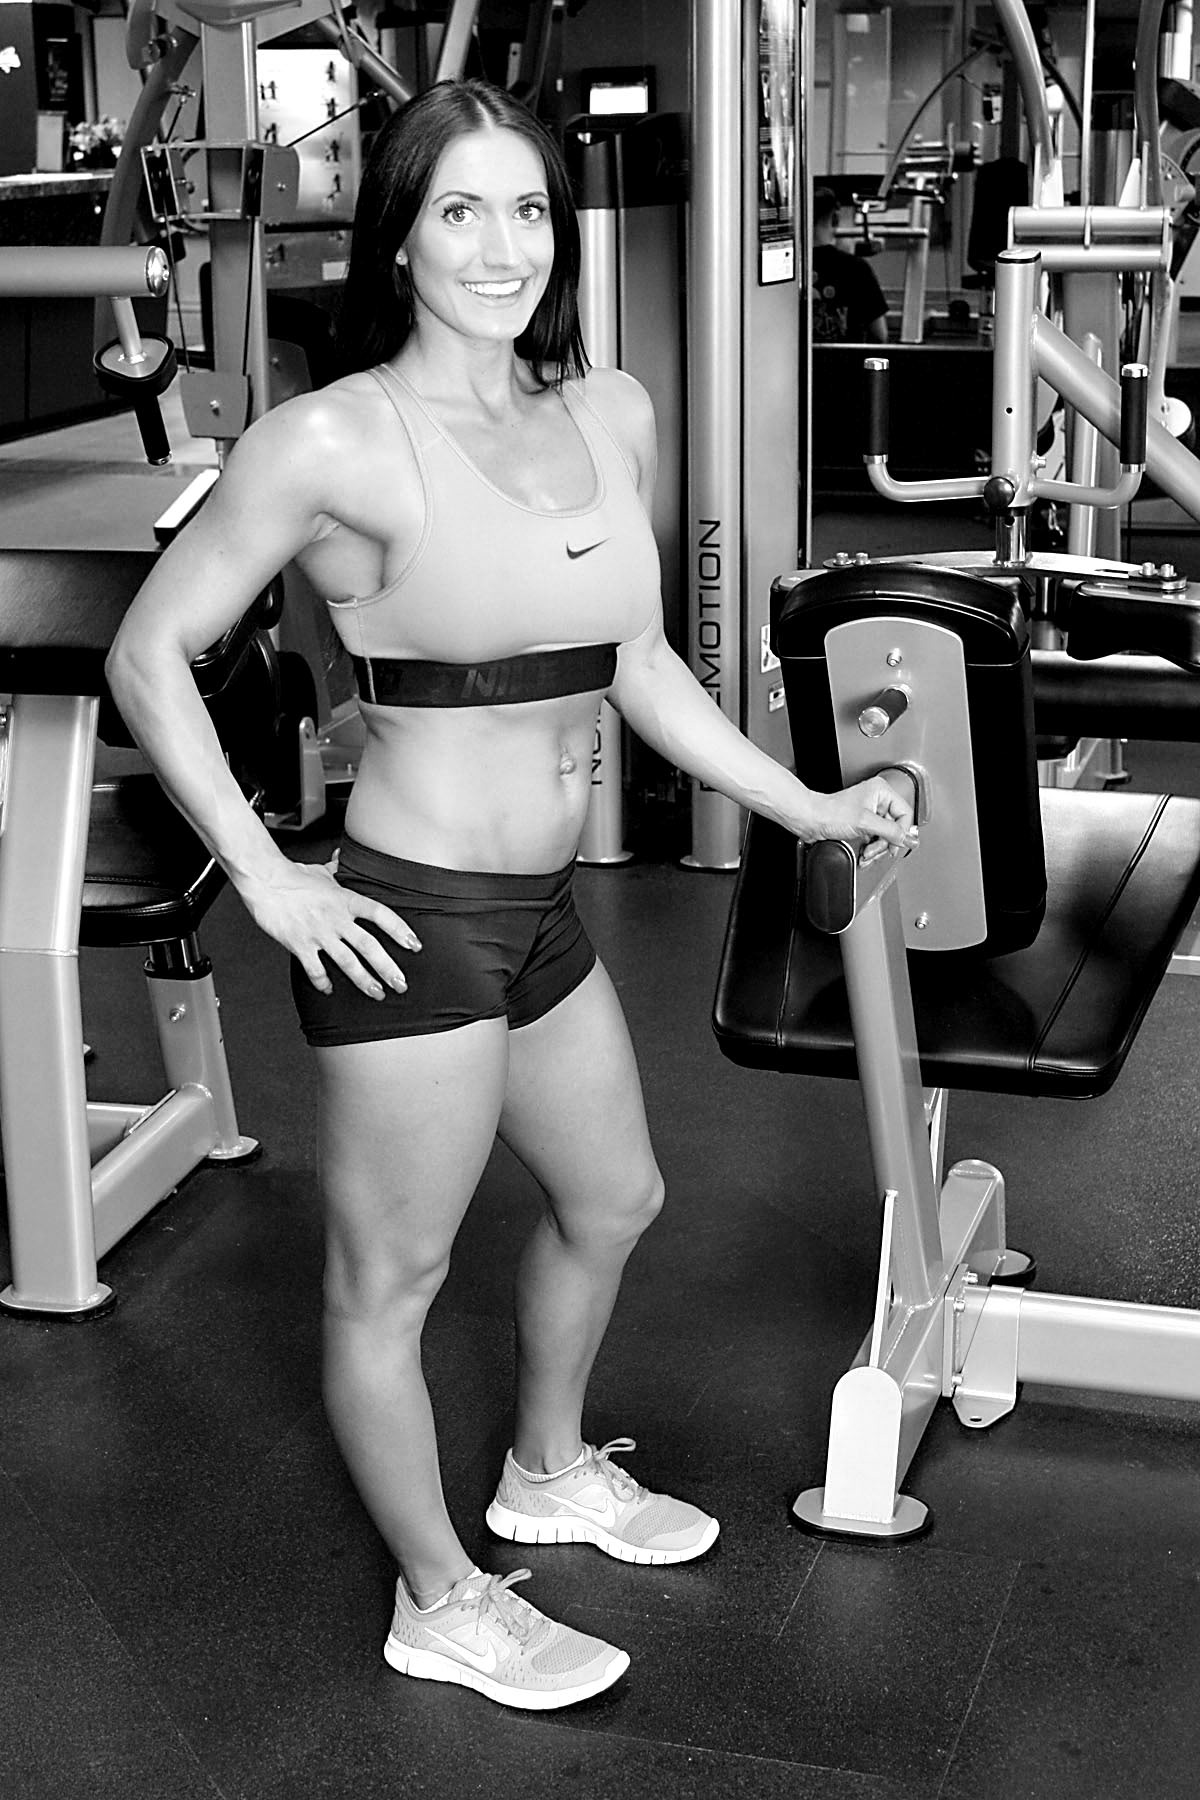 Health fitness workout photo shoot black and white beauty Hot hardwork dedication Canon